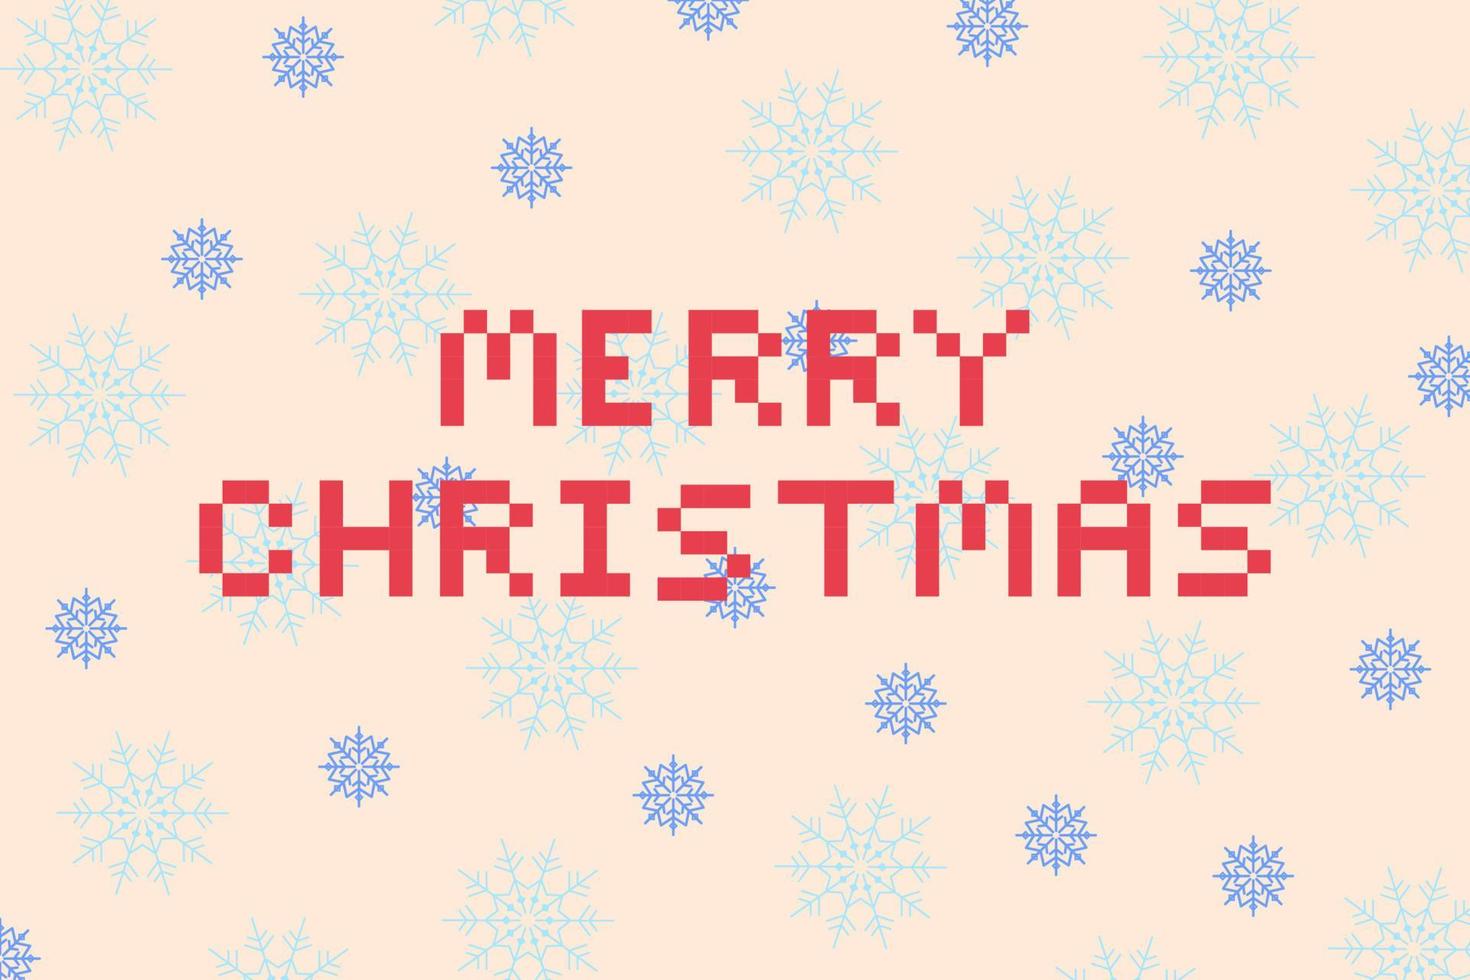 Red lettering Merry Christmas in a flat pixel art style. Horizontal rectangular vector illustration of blue snowflakes of different sizes on a light pink background